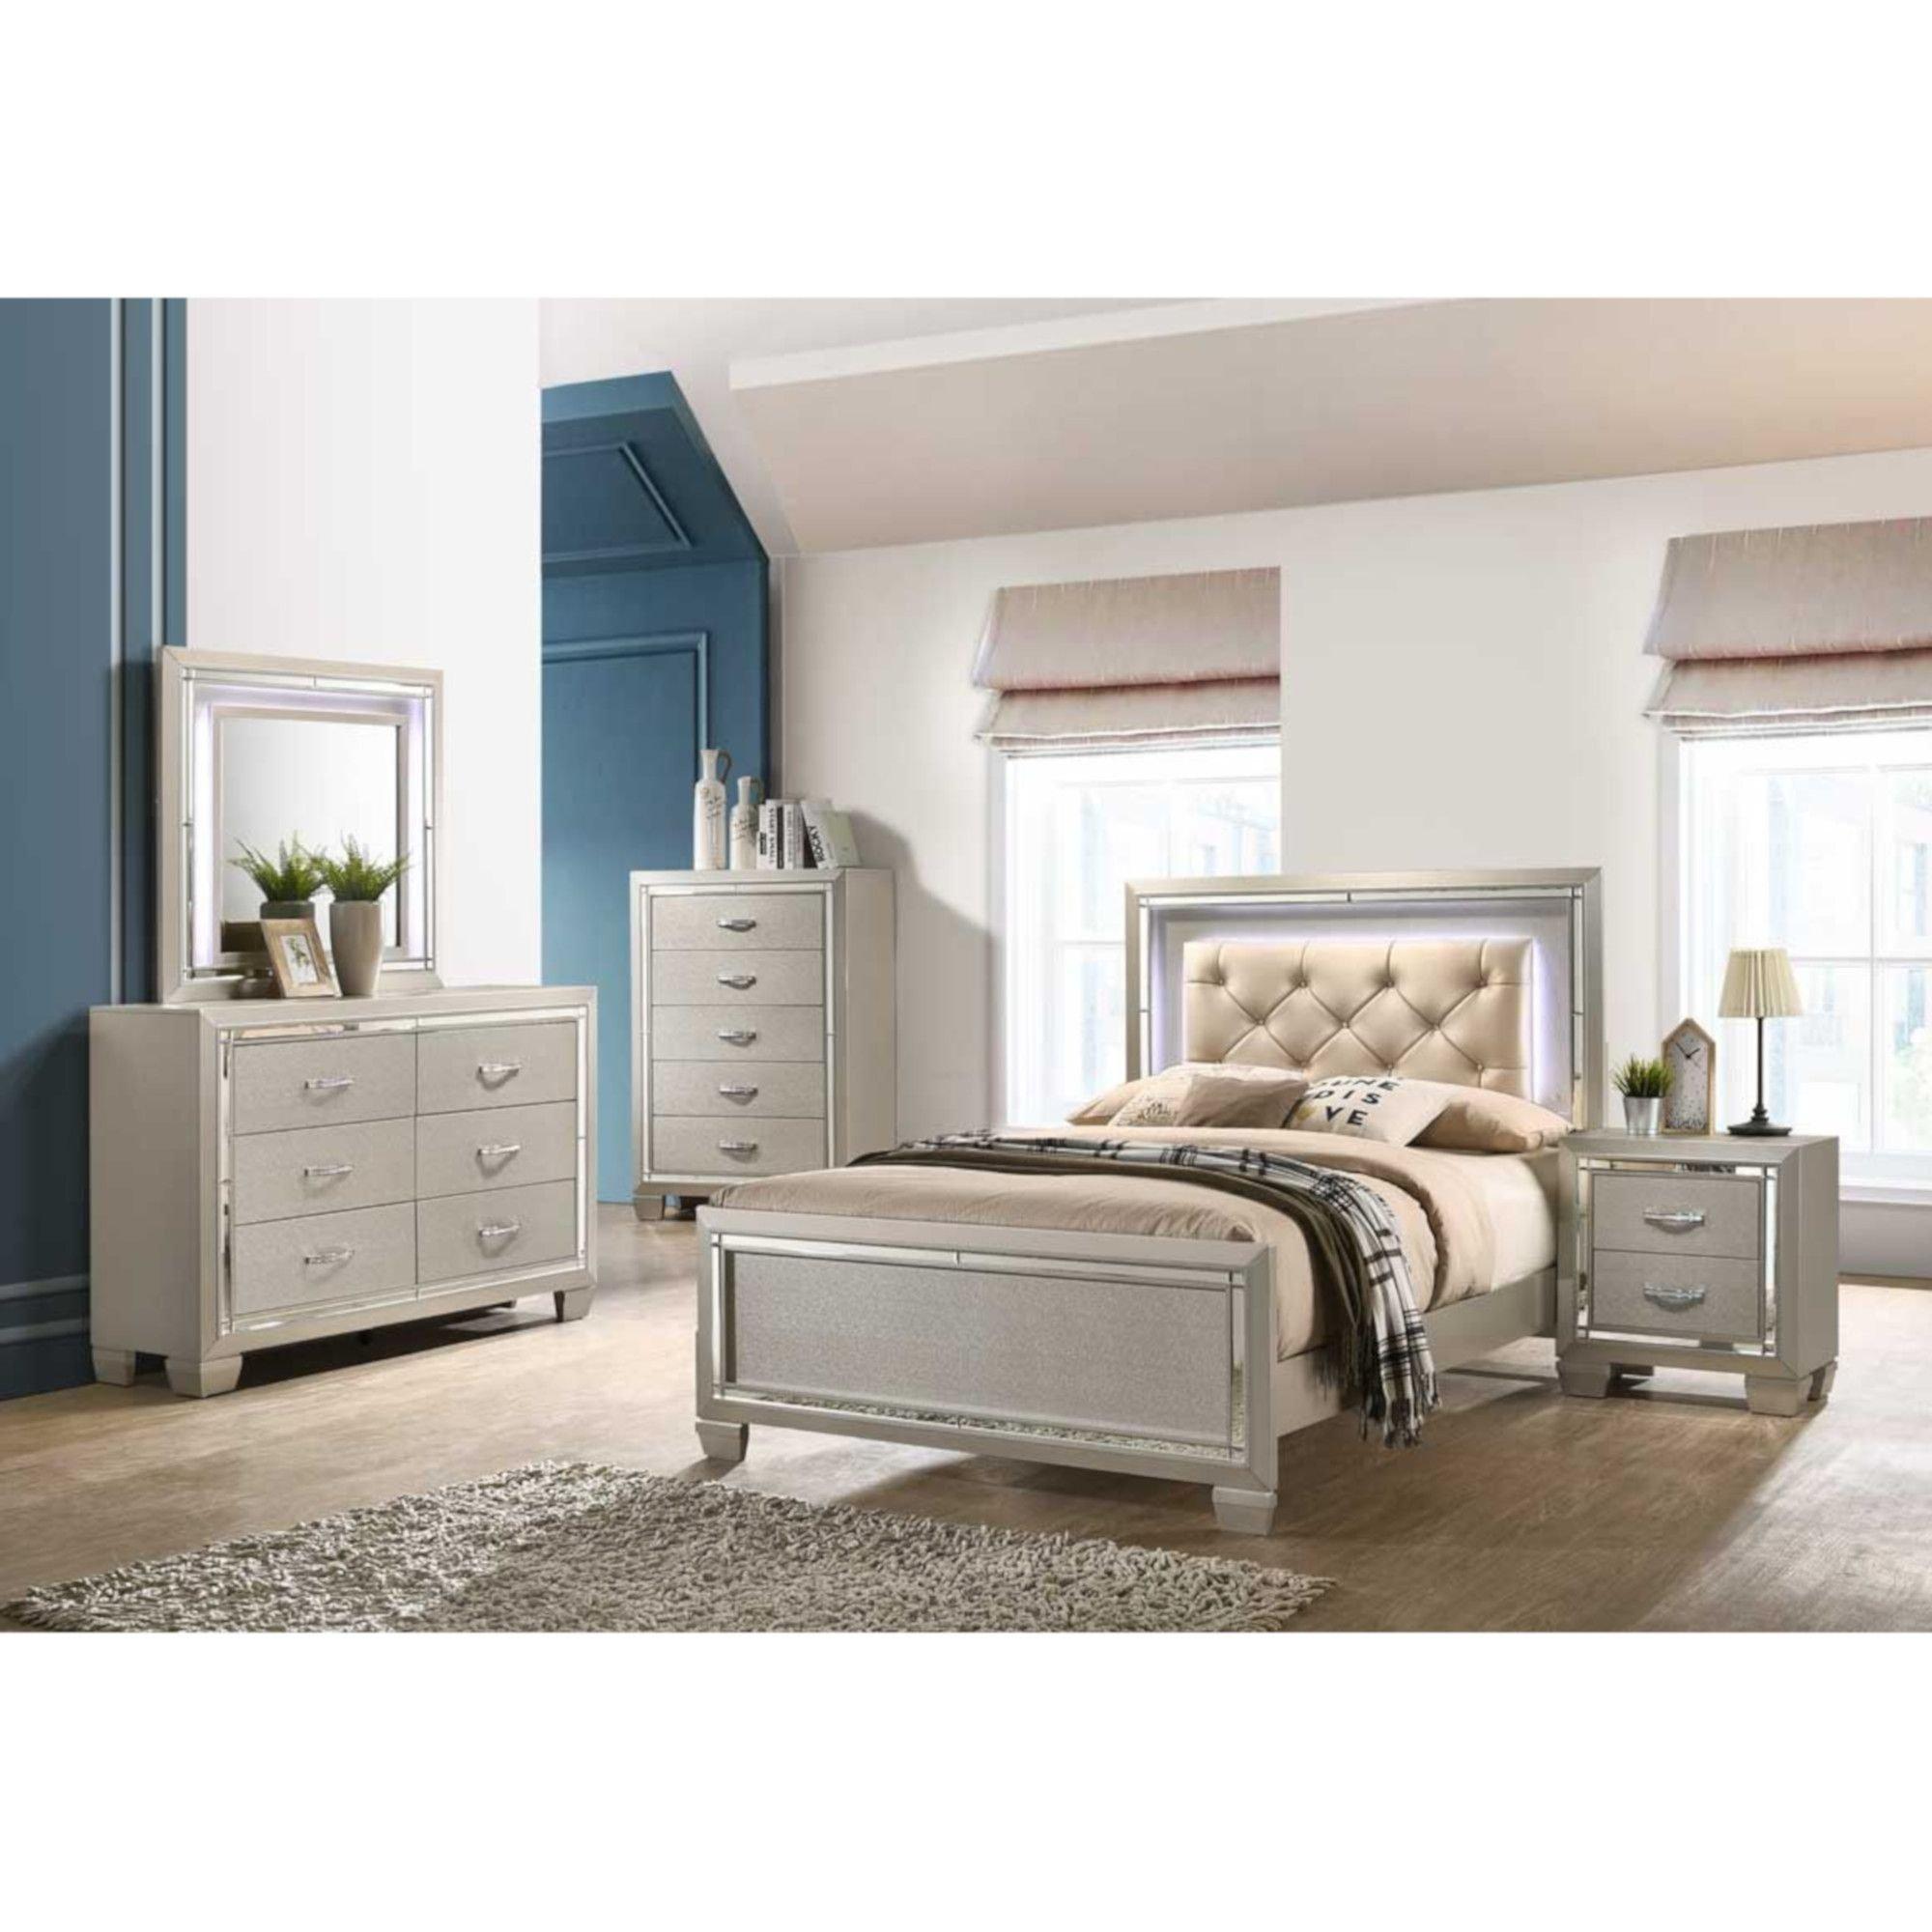 Rent To Own Elements International 6 Piece Platinum Full Panel Bedroom Set At Aaron S Today